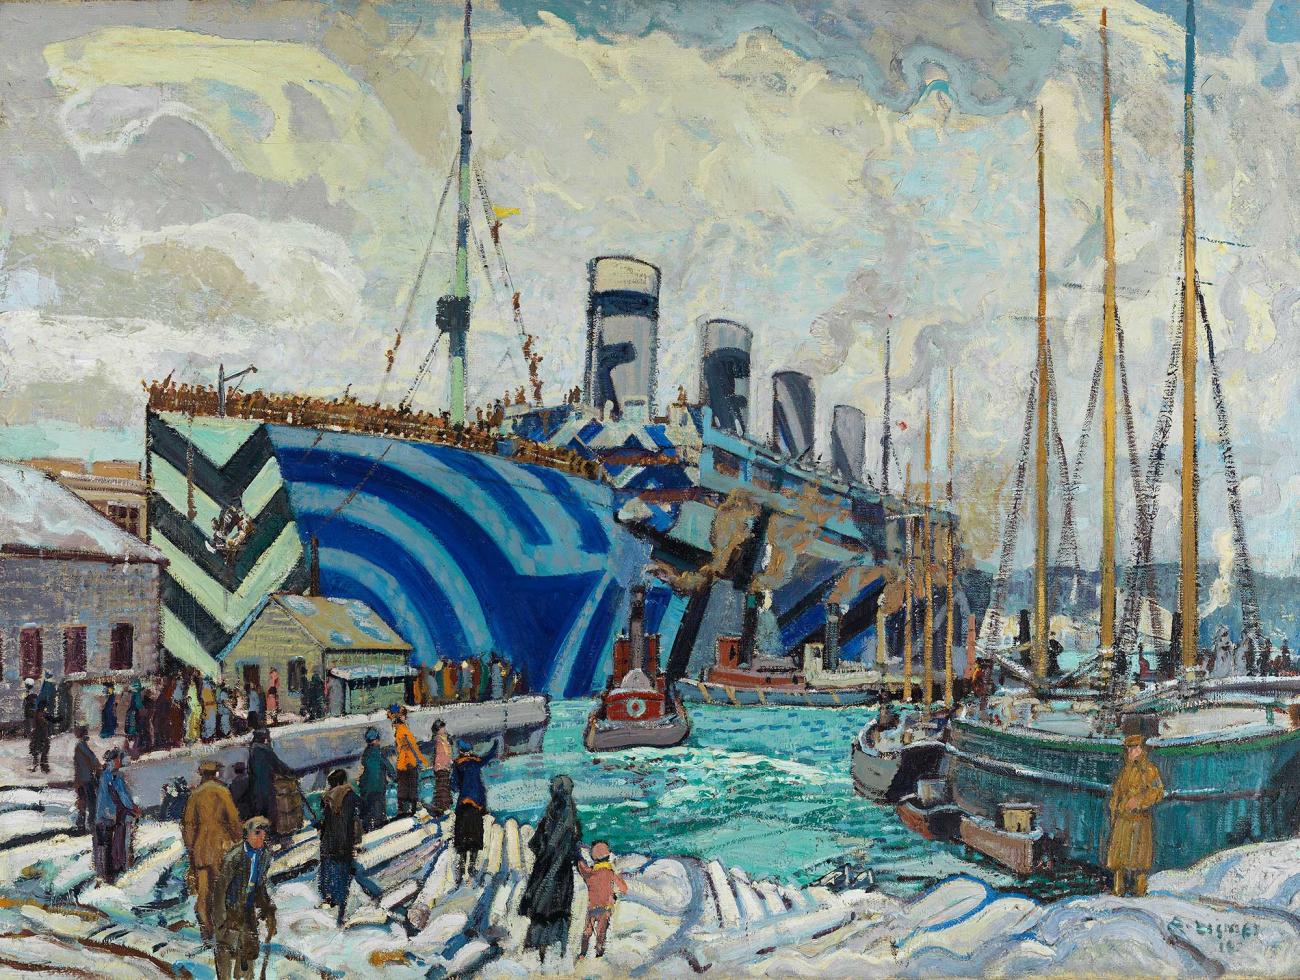 Painting of a dazzle ship with geometric patterns on it in shades of blue.